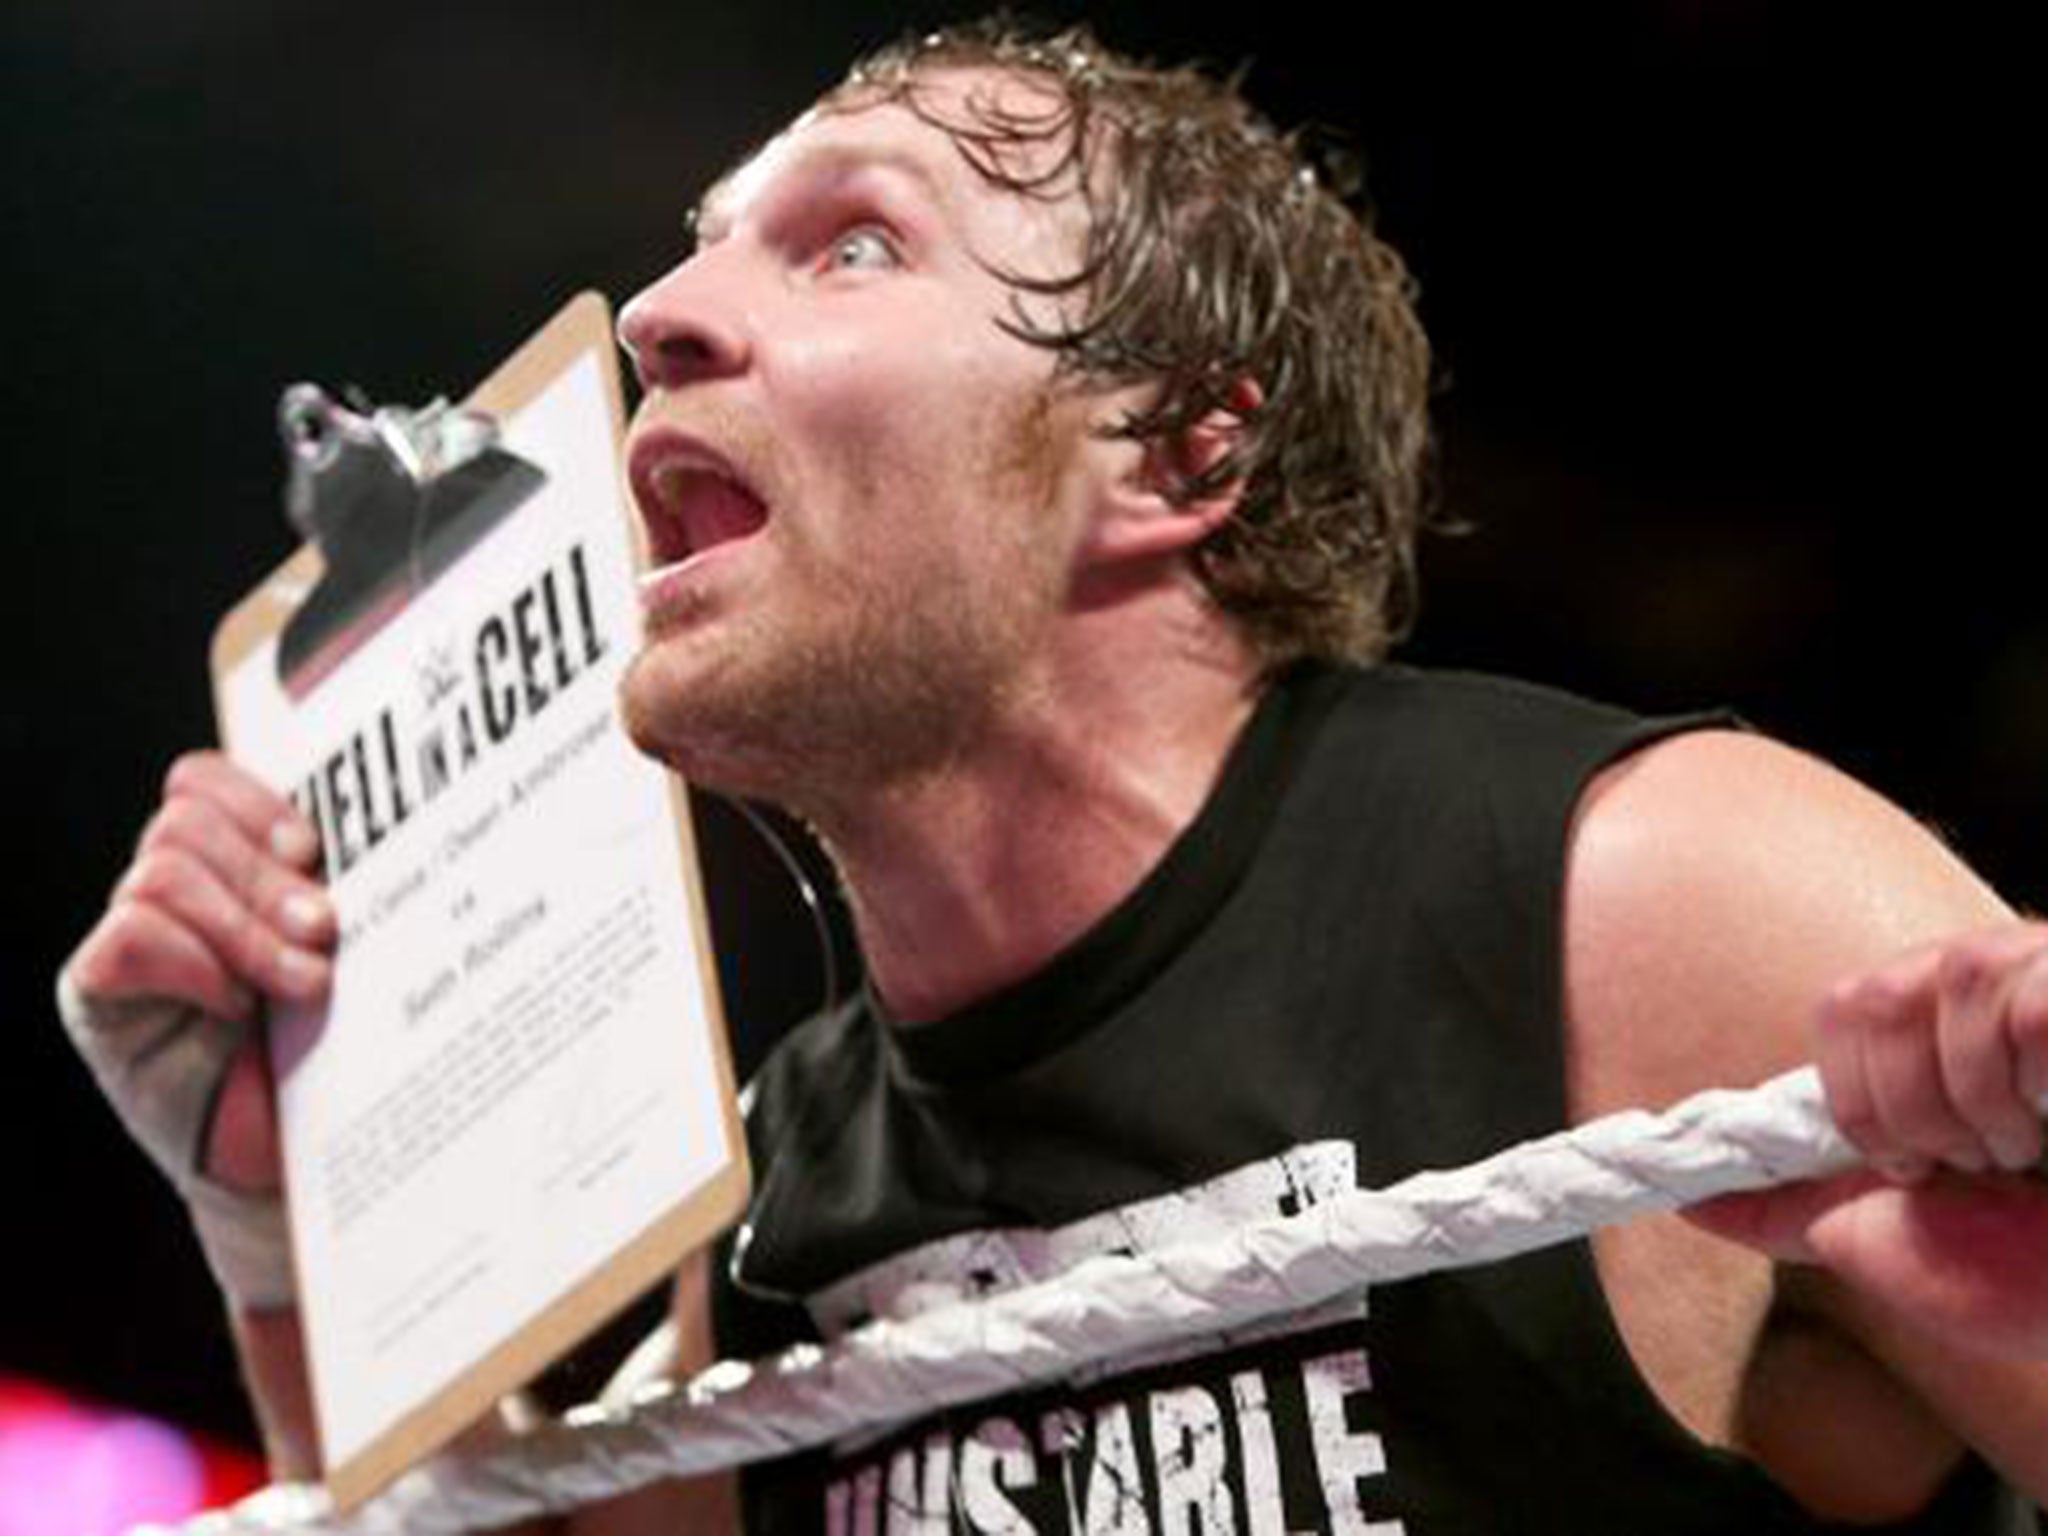 Dean Ambrose grabs the contract to face Seth Rollins at Hell in a Cell